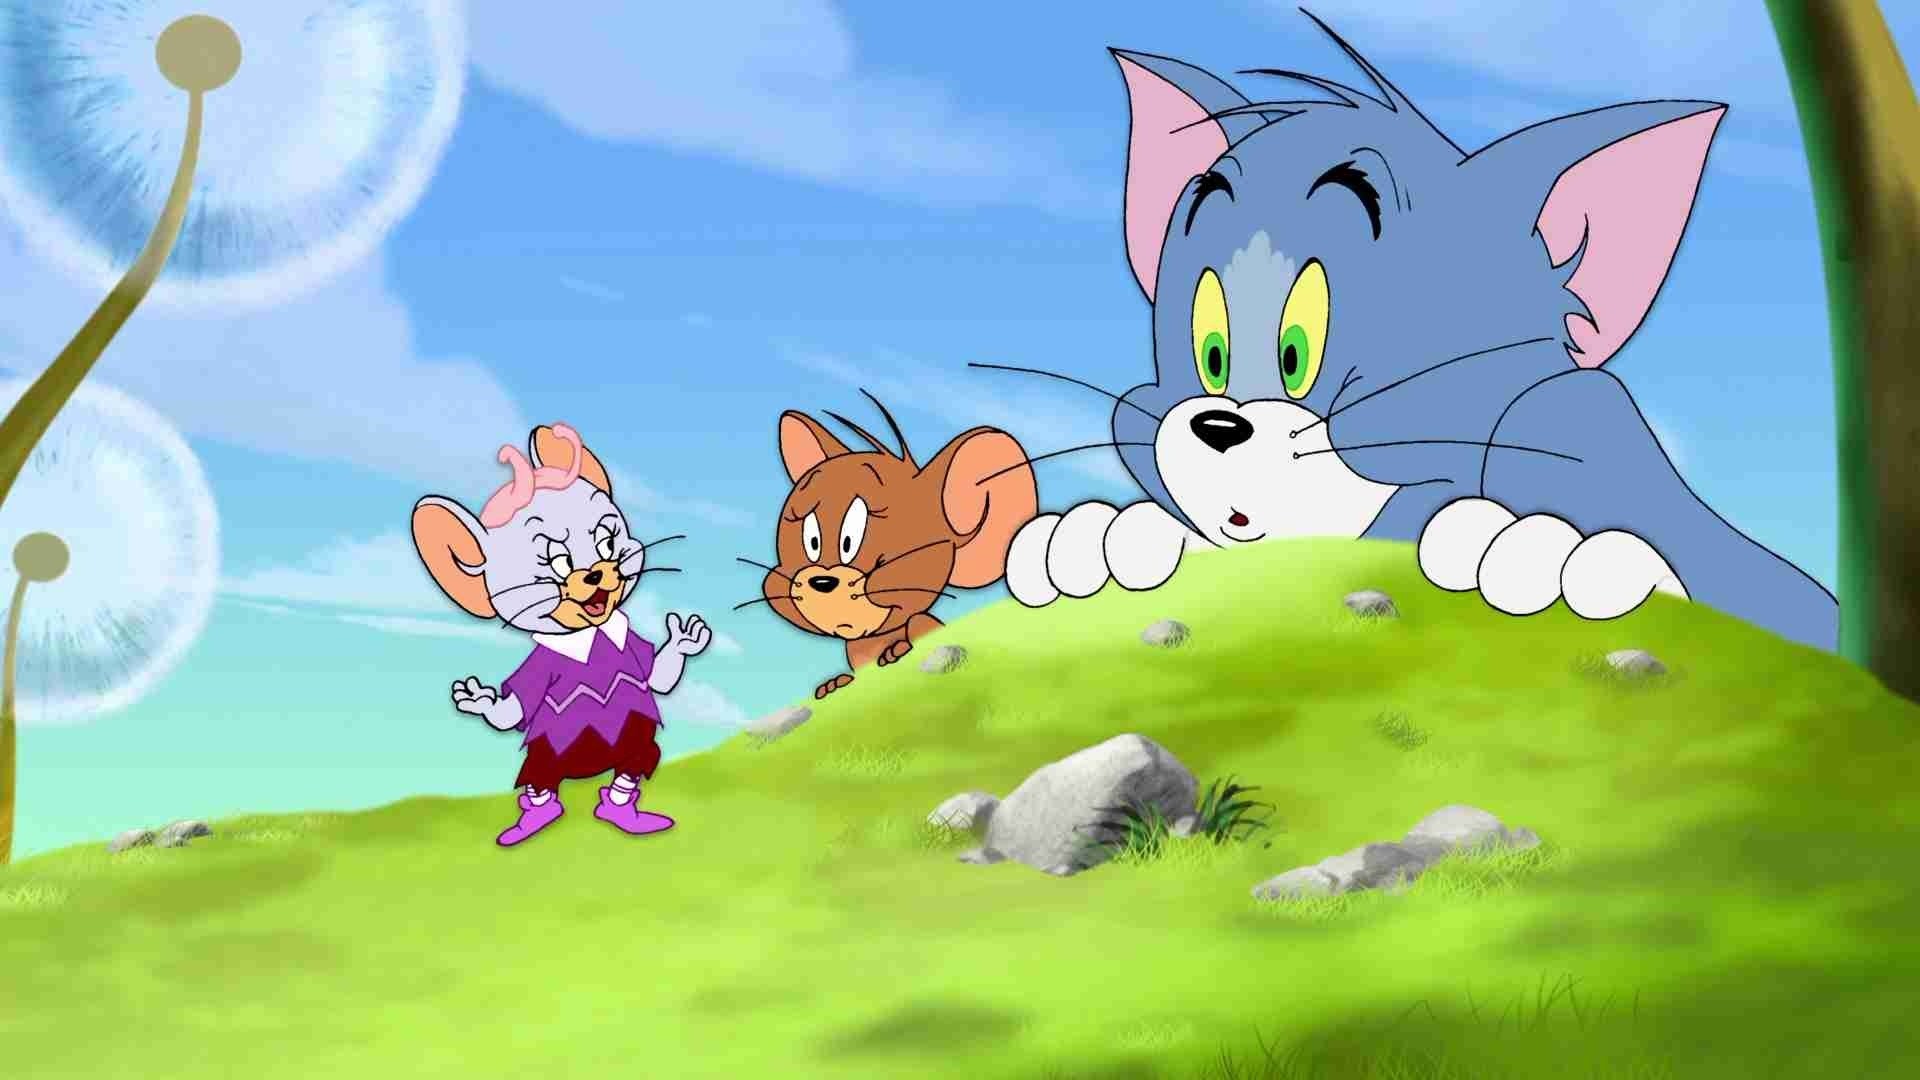 1920x1080 Tom and jerry funny cute image